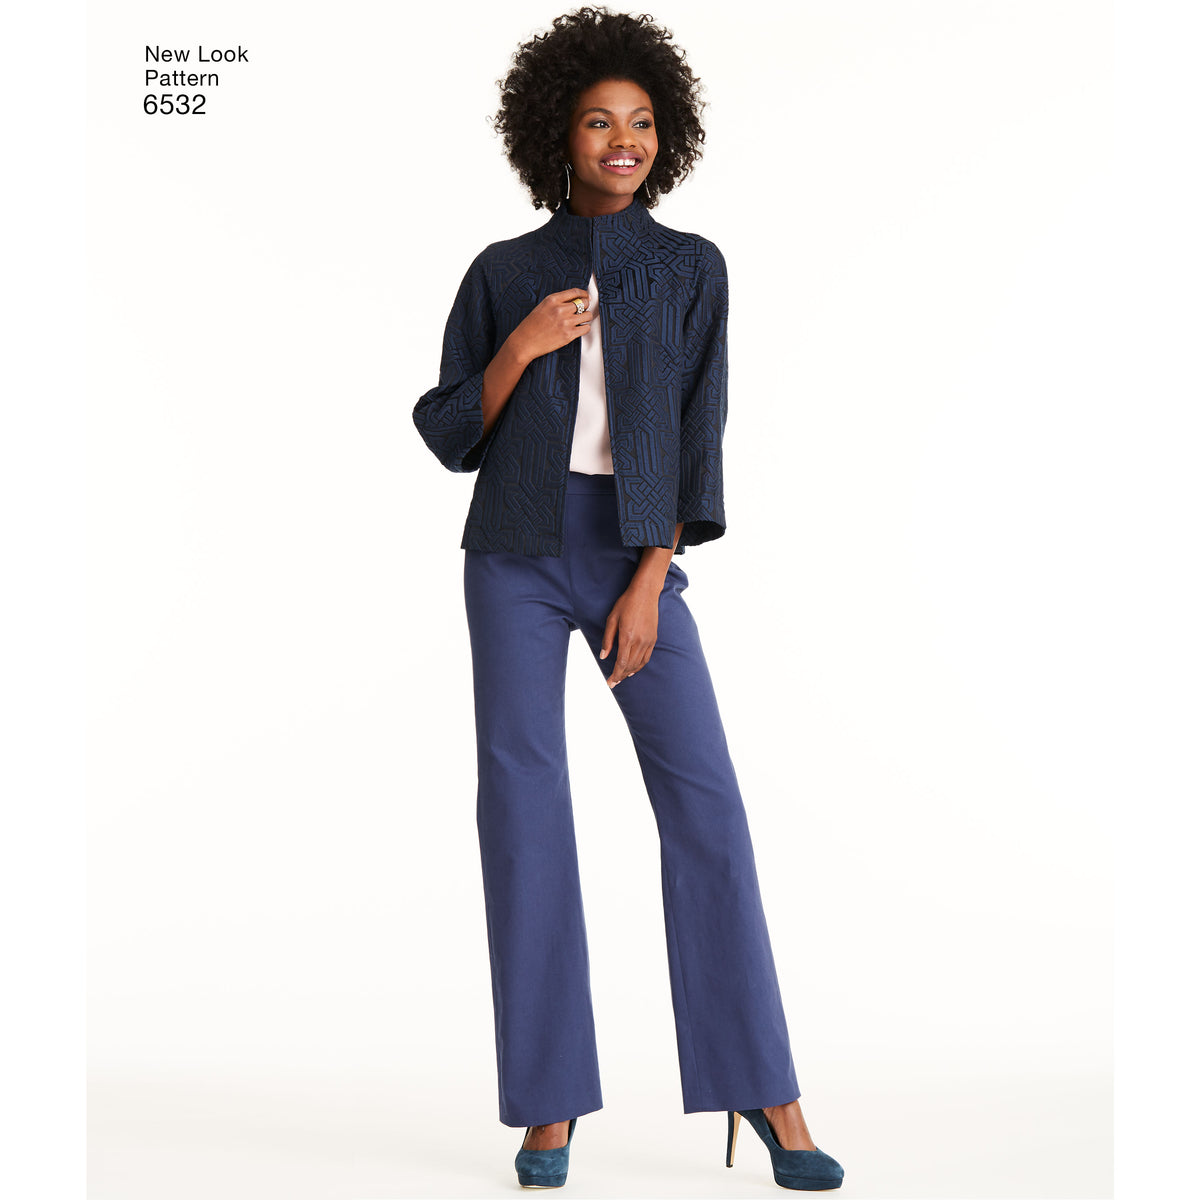 6532 New Look Pattern 6532 Women's trousers, Top and Jacket